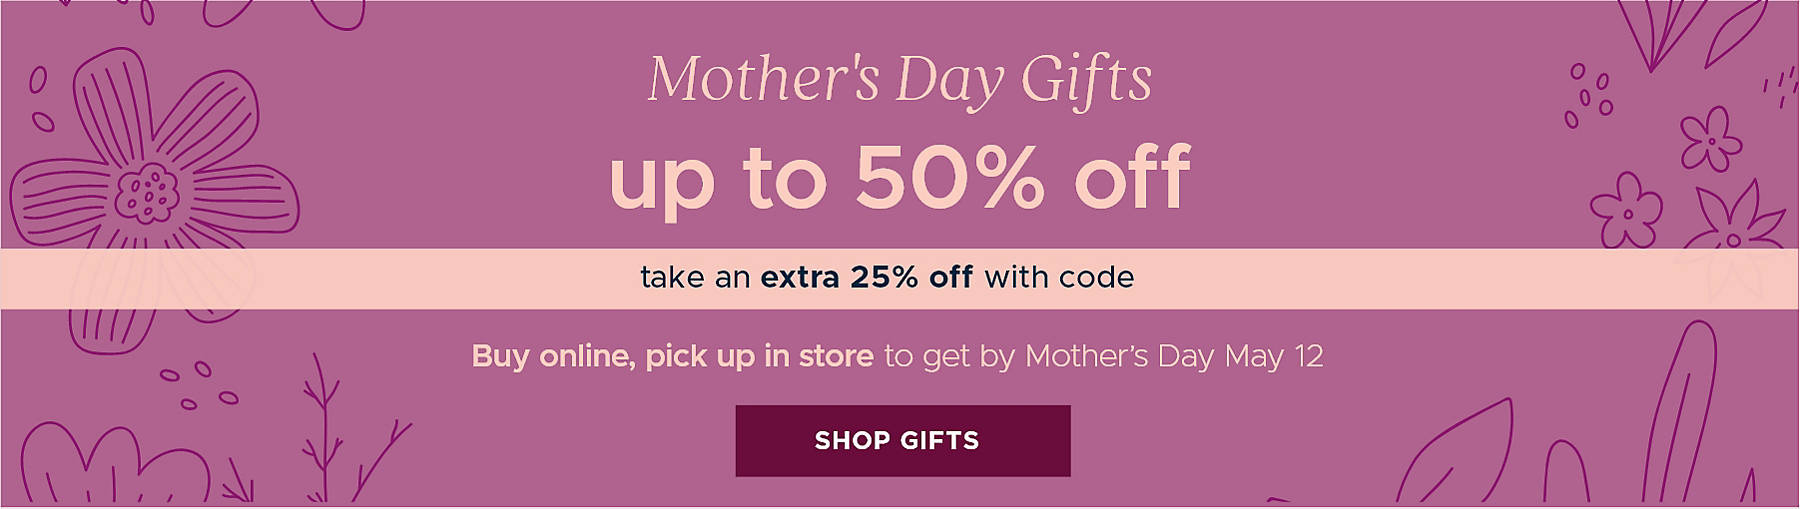 Mother's Day Gifts up to 50% off take an extra 25% off with code Buy online, pick up in store to get by Mother's Day May 12 Shop Gifts